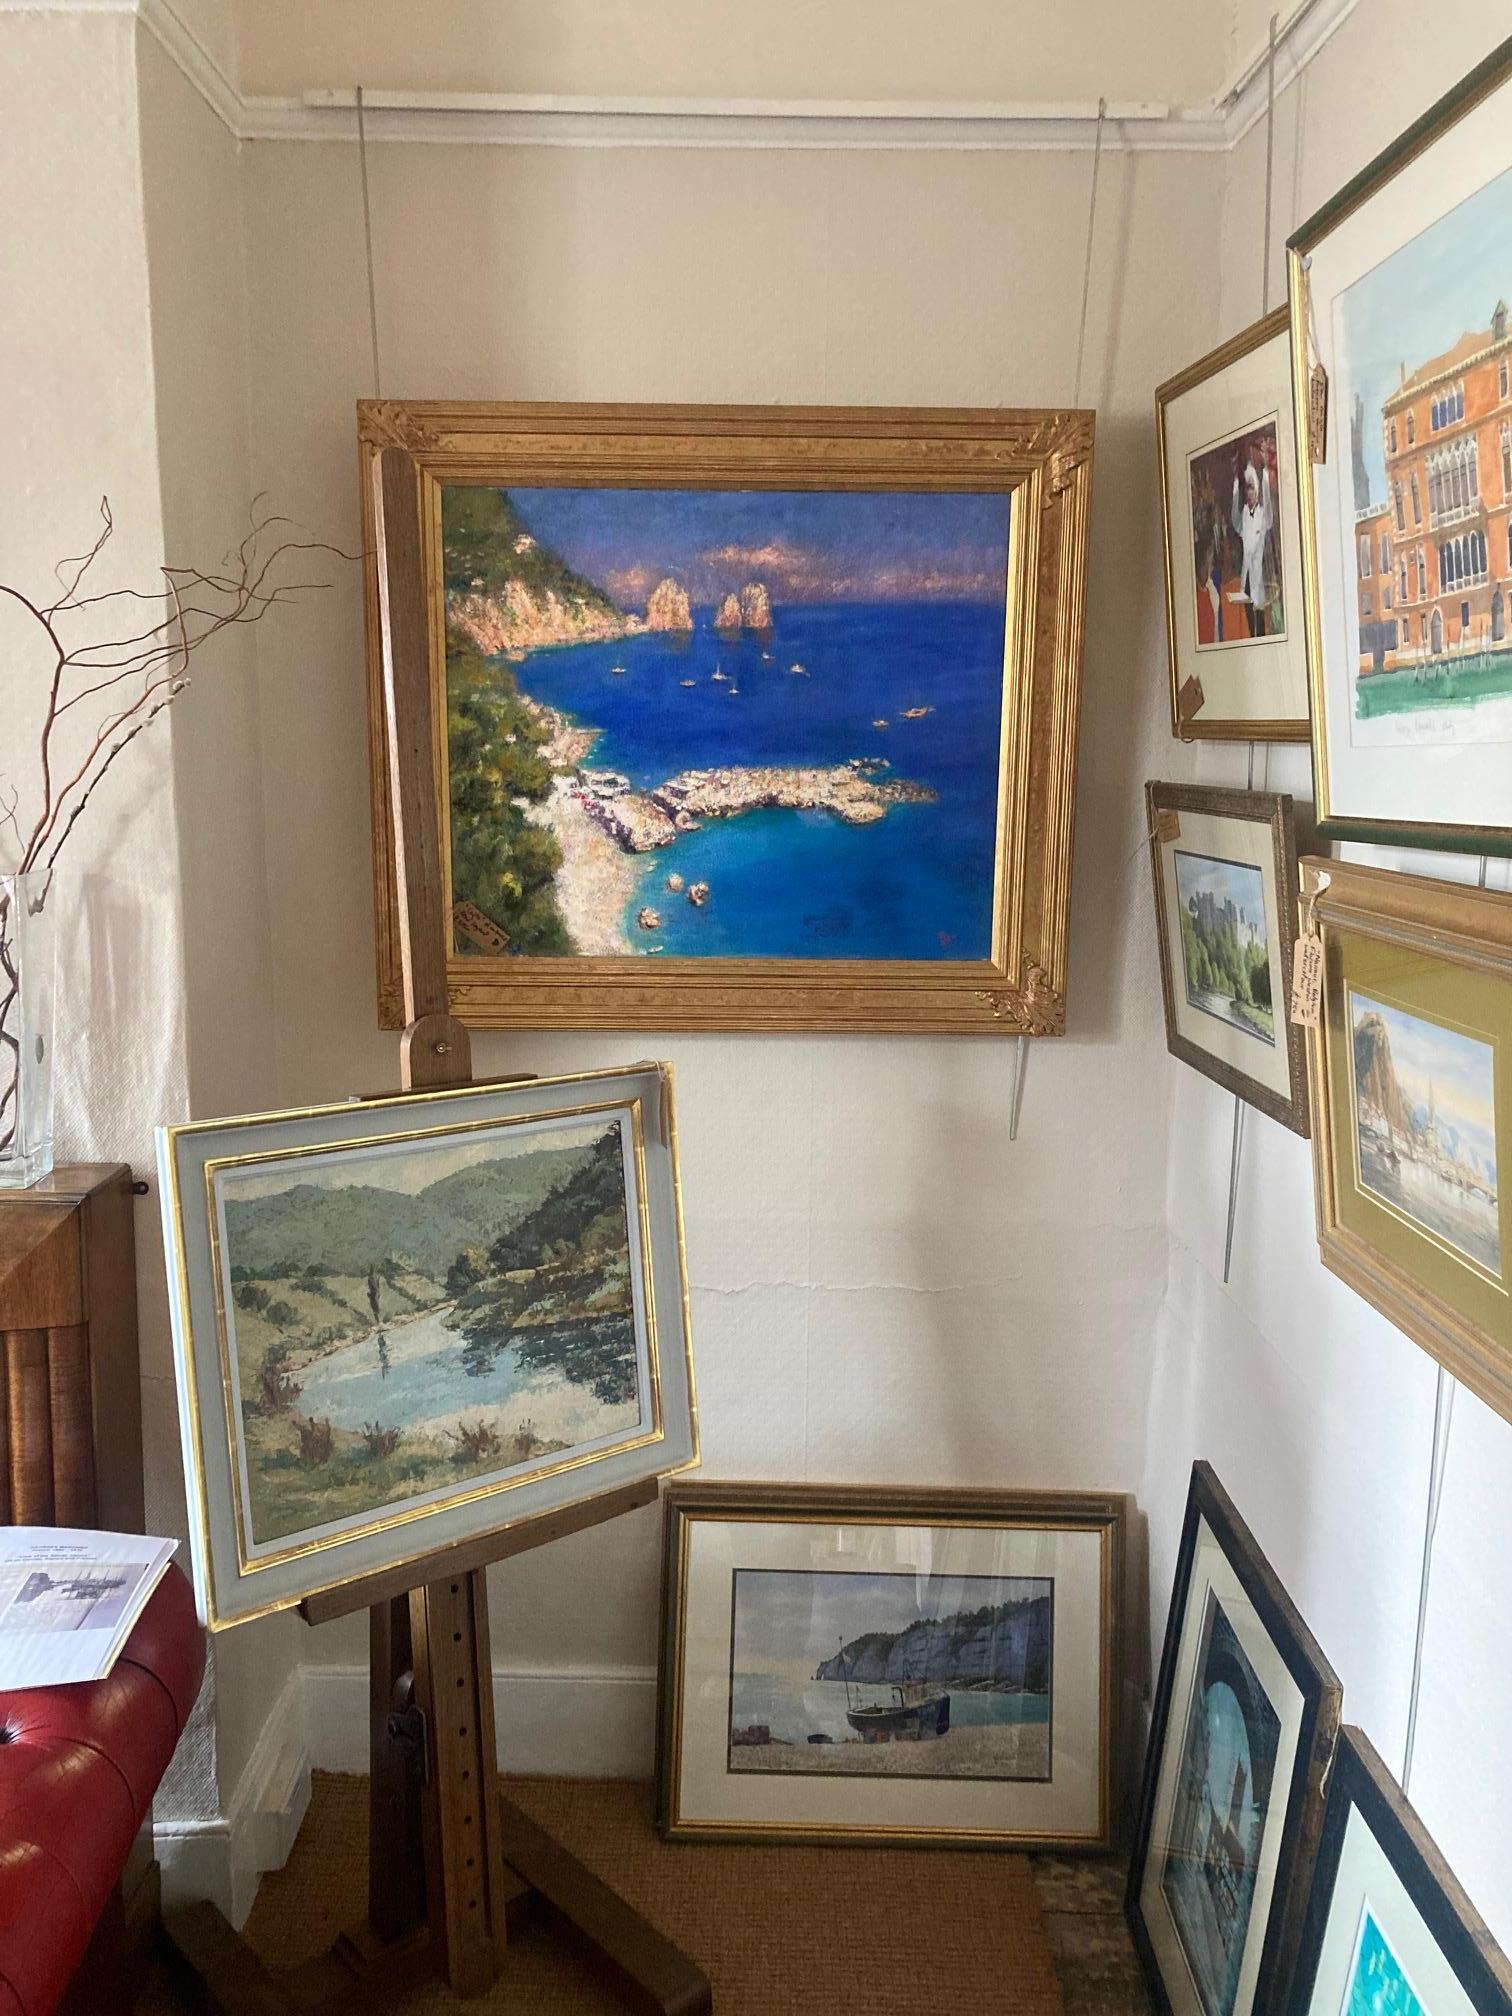 Large Oil on Canvas by the contemporary artist Rene Legrand.  The painting depicts the view looking down to the Marina at Capri.  Legrand was born in Singapore in 1953 to Swiss parents, educated in England and studied painting at the Slade School of